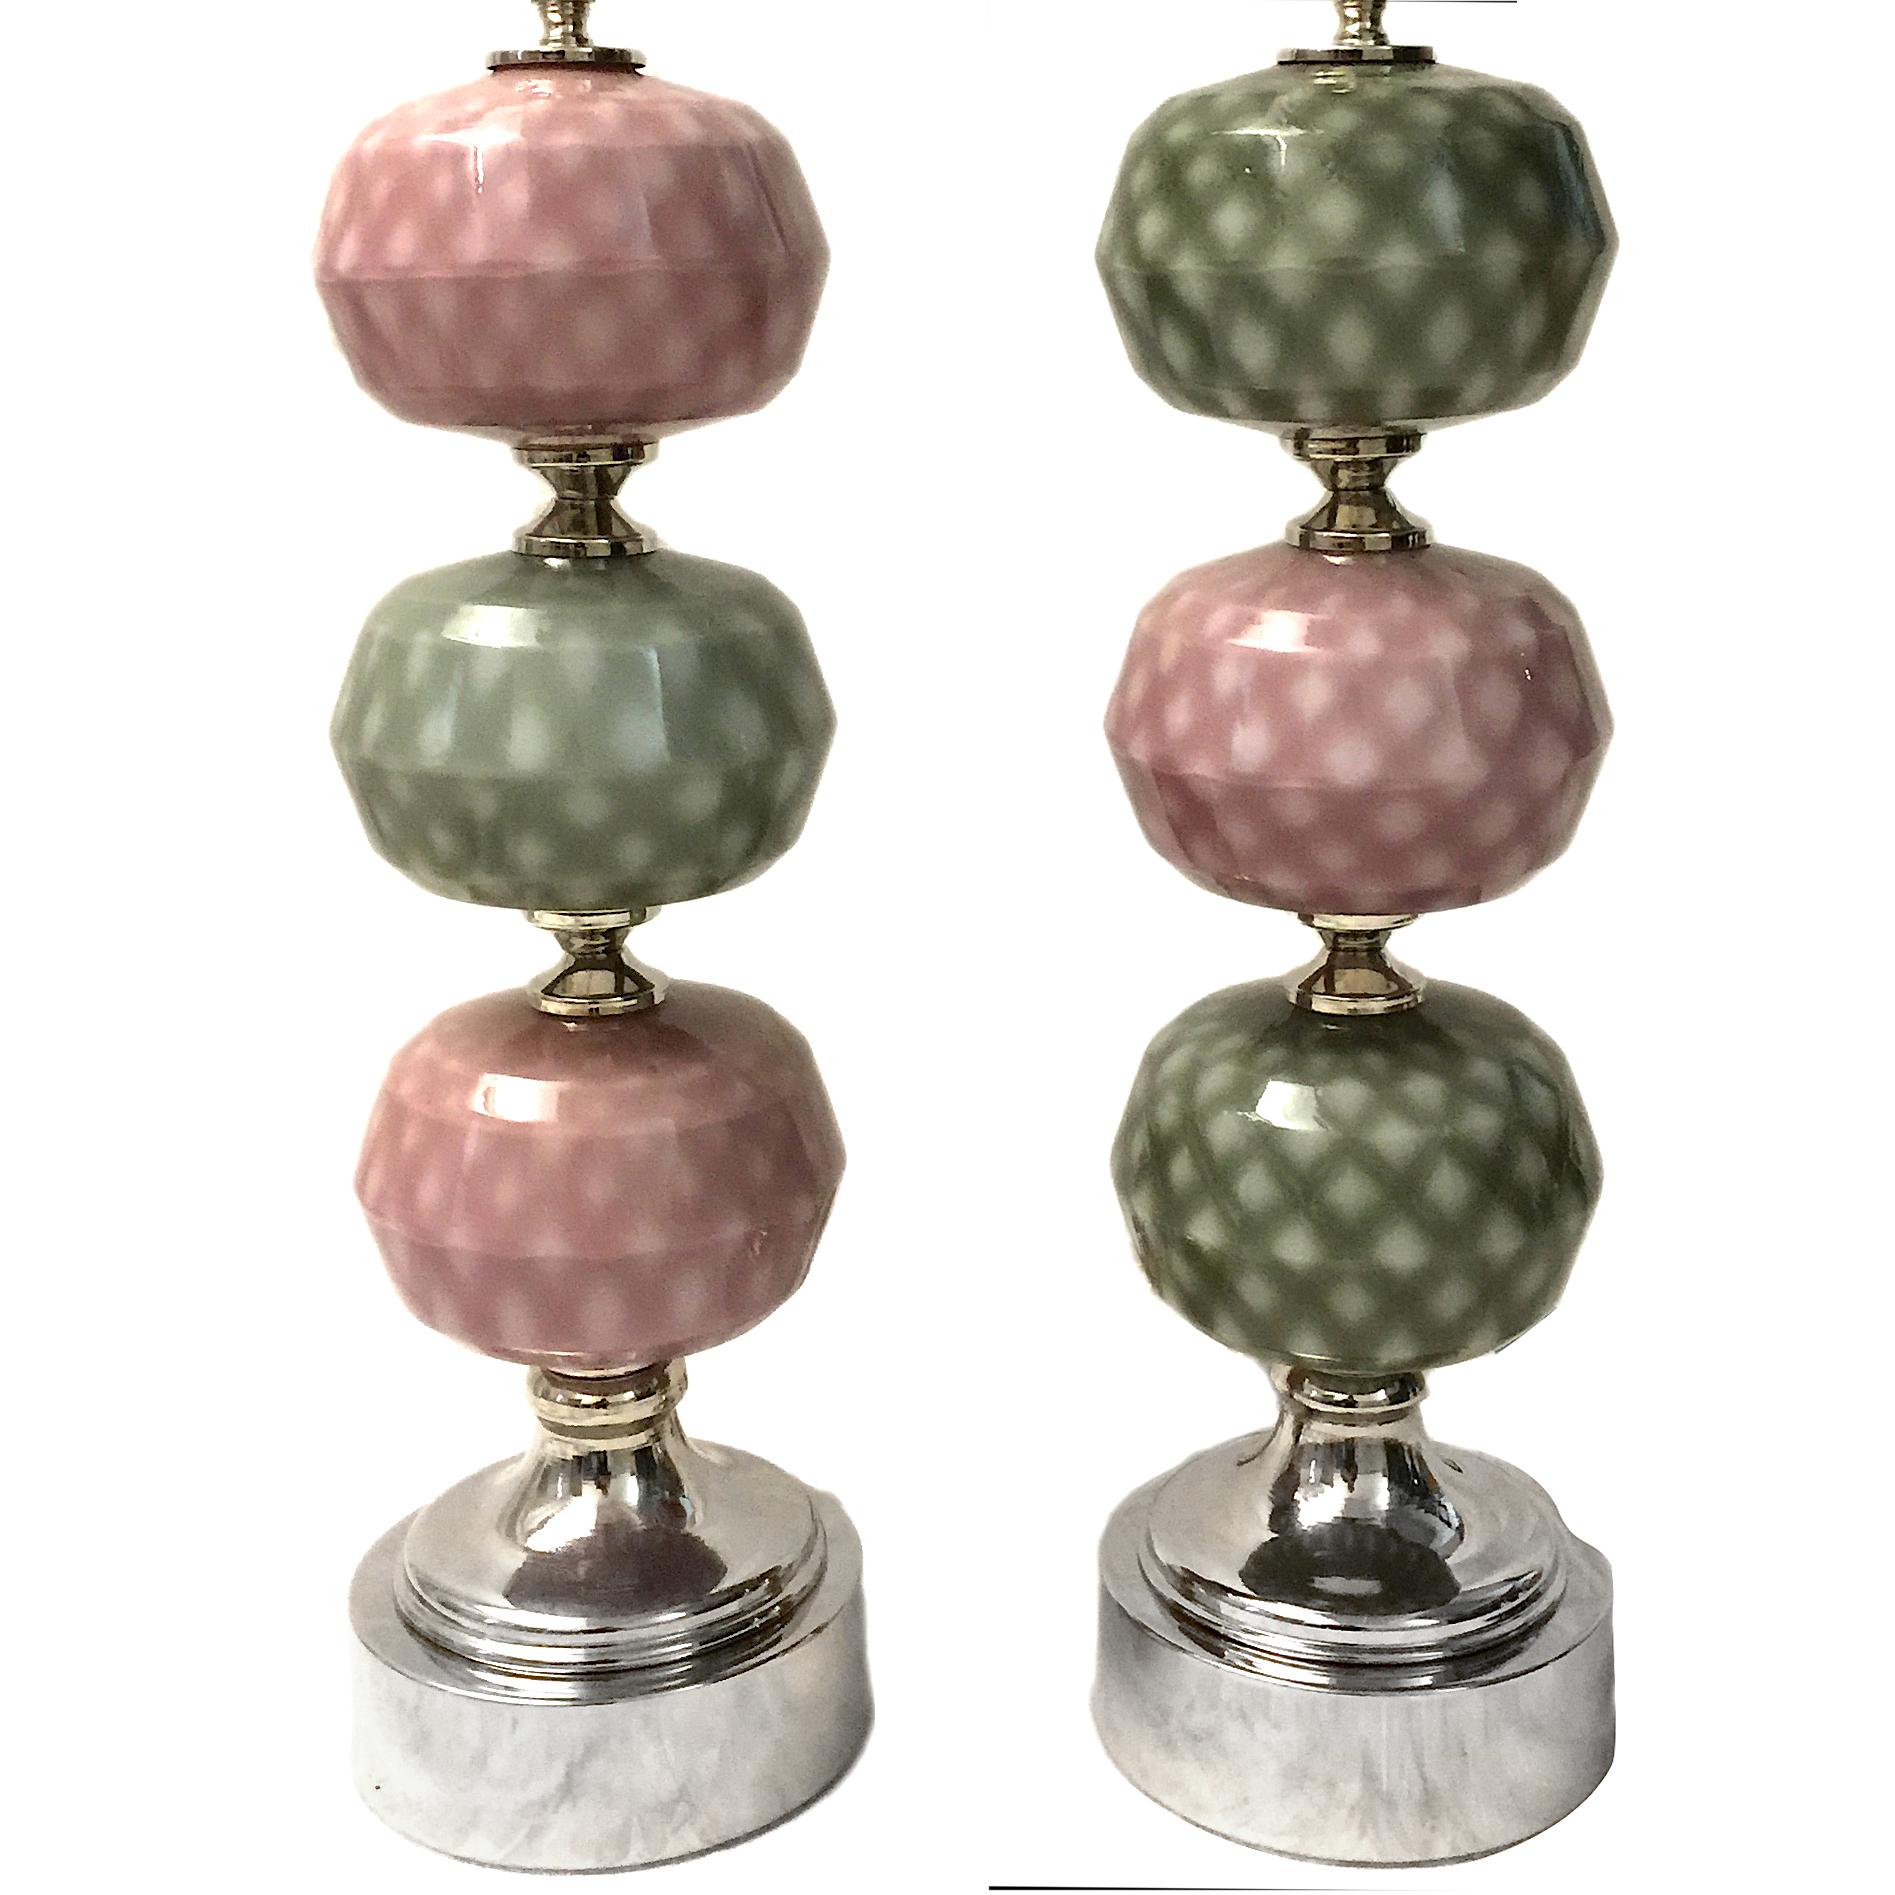 Pair of circa late 1940's Italian molded glass table lamps with gray and mauve glass globes.

Measurements:
Height of body: 20.5